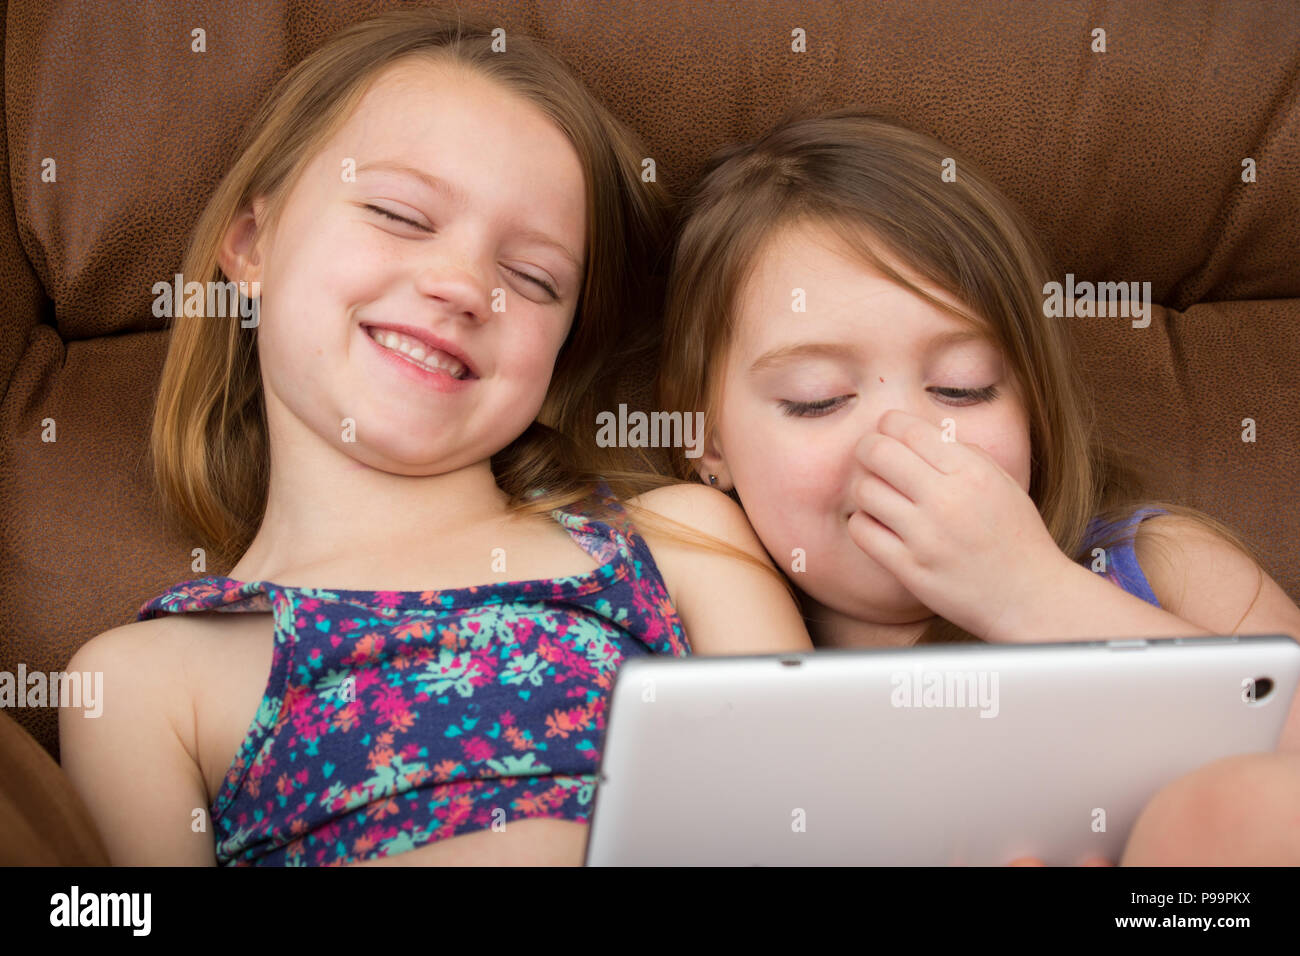 Two girls watching a tablet and laughing Stock Photo